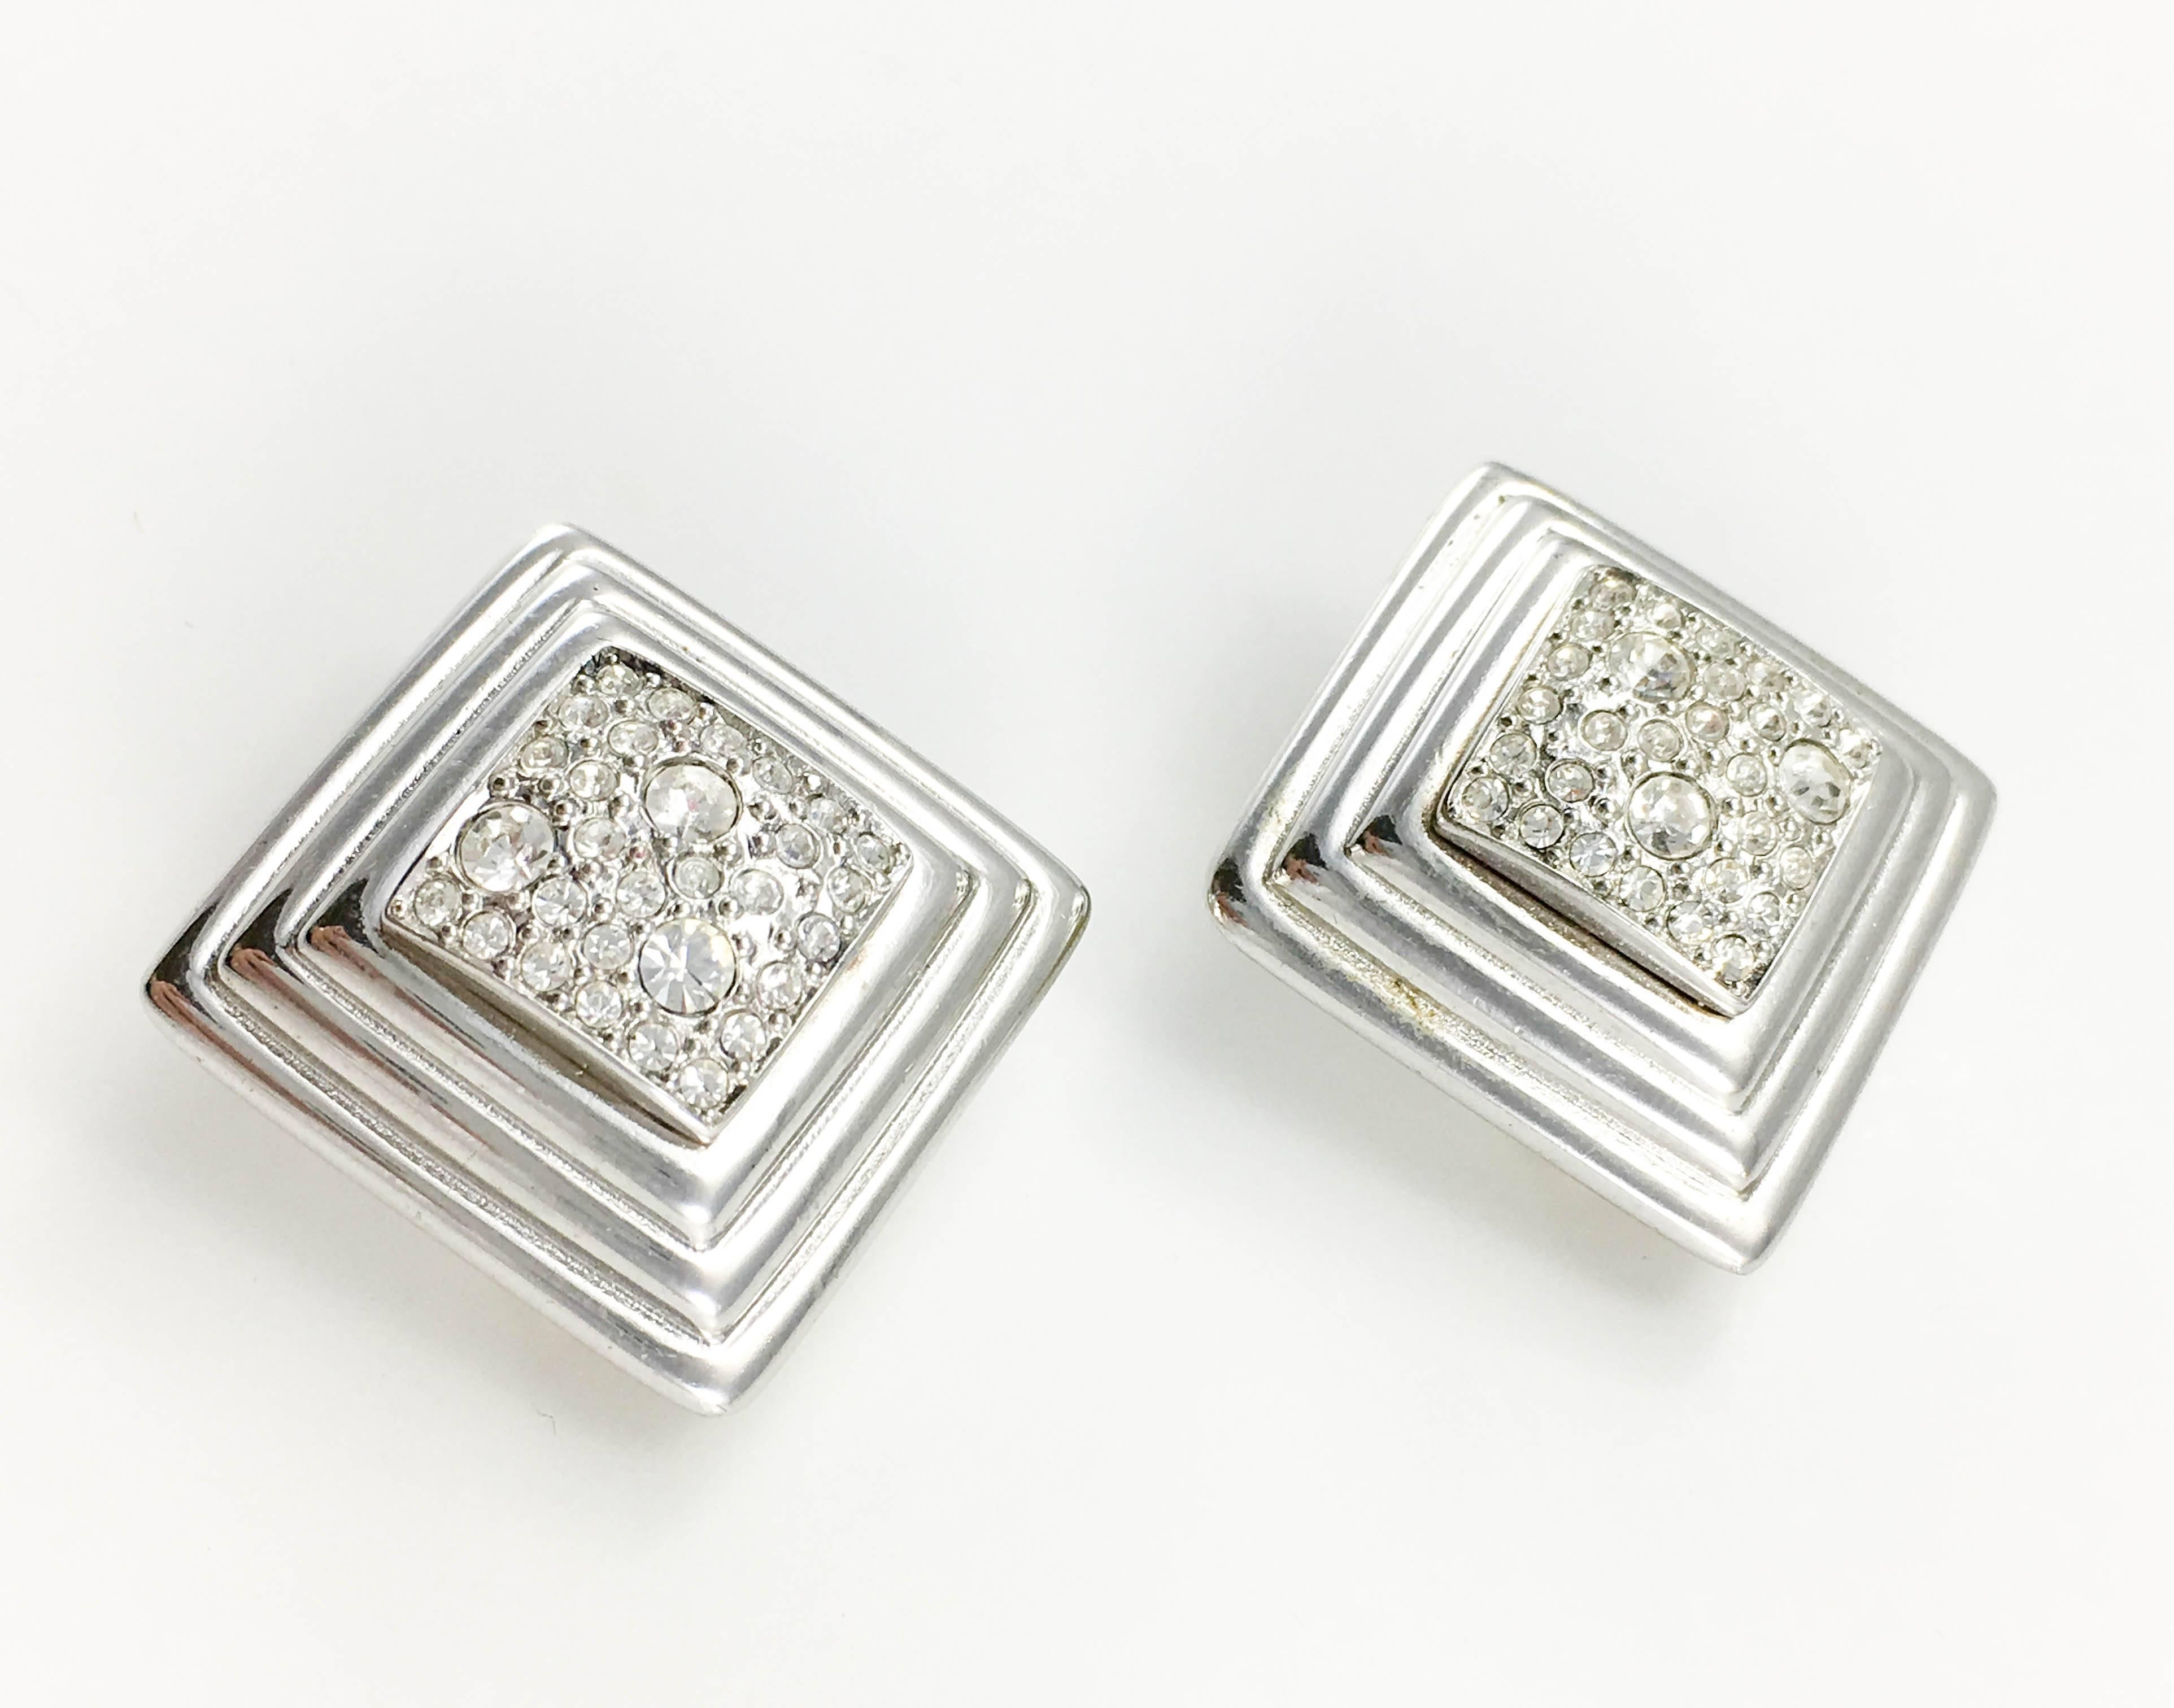 Dior Art Deco Style Diamanté Embellished Stepped Lozenge Earrings - 1980's In Excellent Condition In London, Chelsea